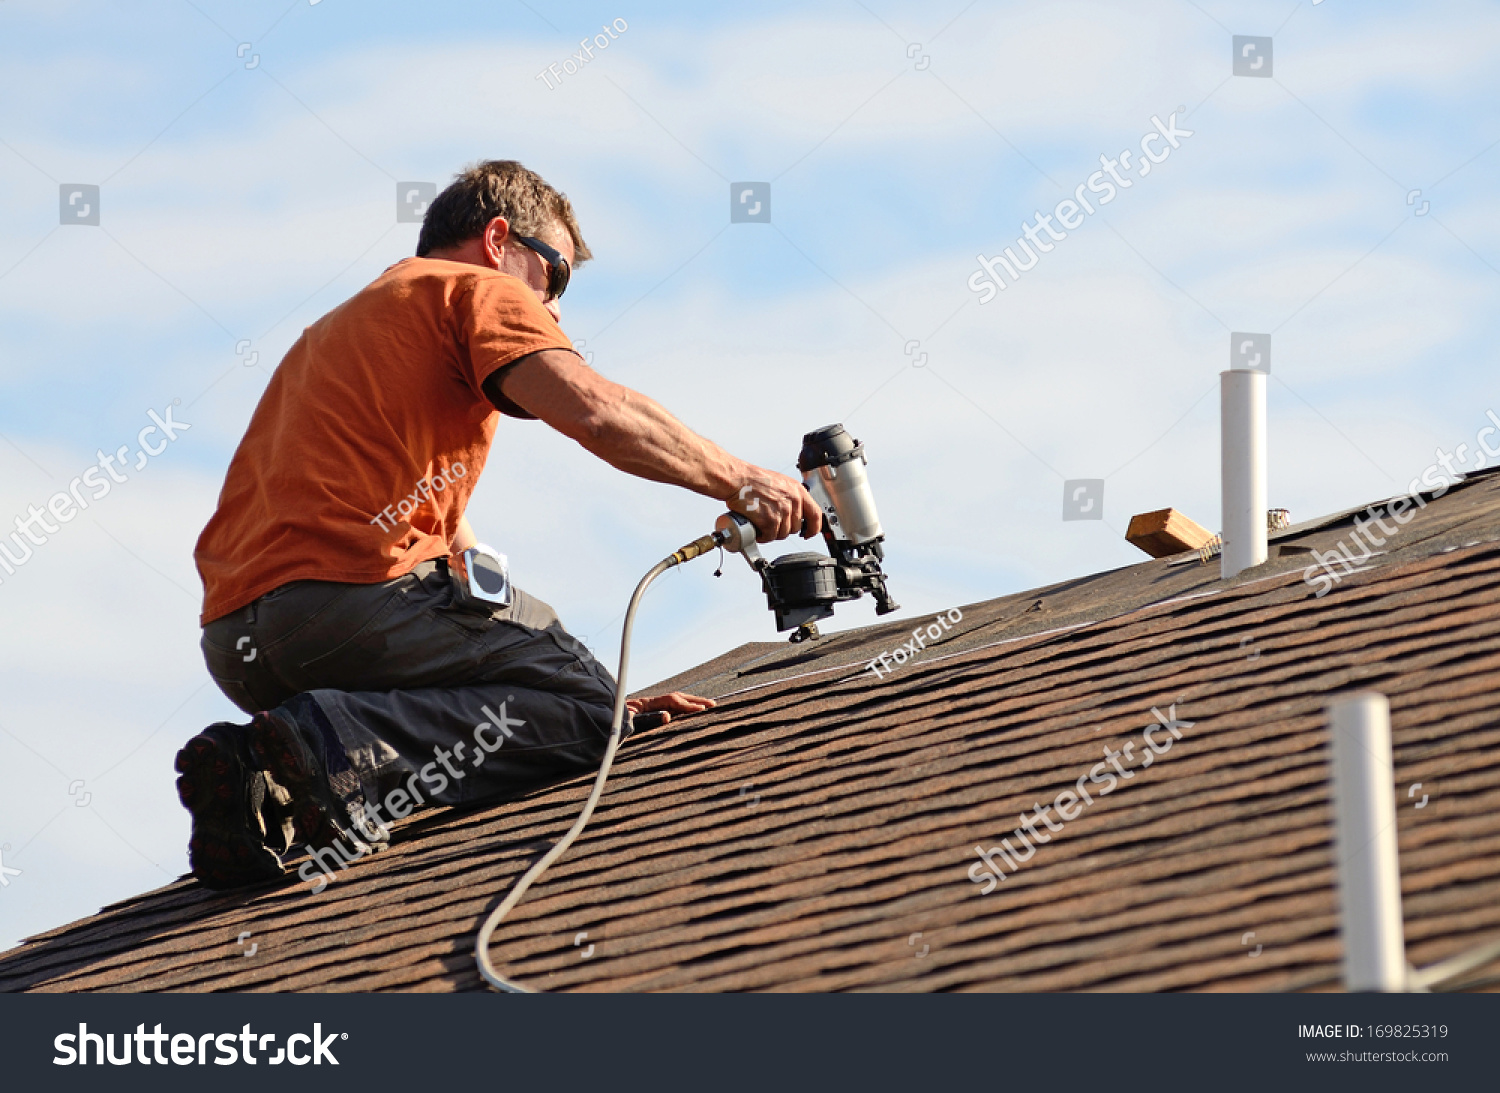 stock-photo-building-contractor-putting-the-asphalt-roofing-on-a-large-commercial-apartment-building-development-169825319.jpg